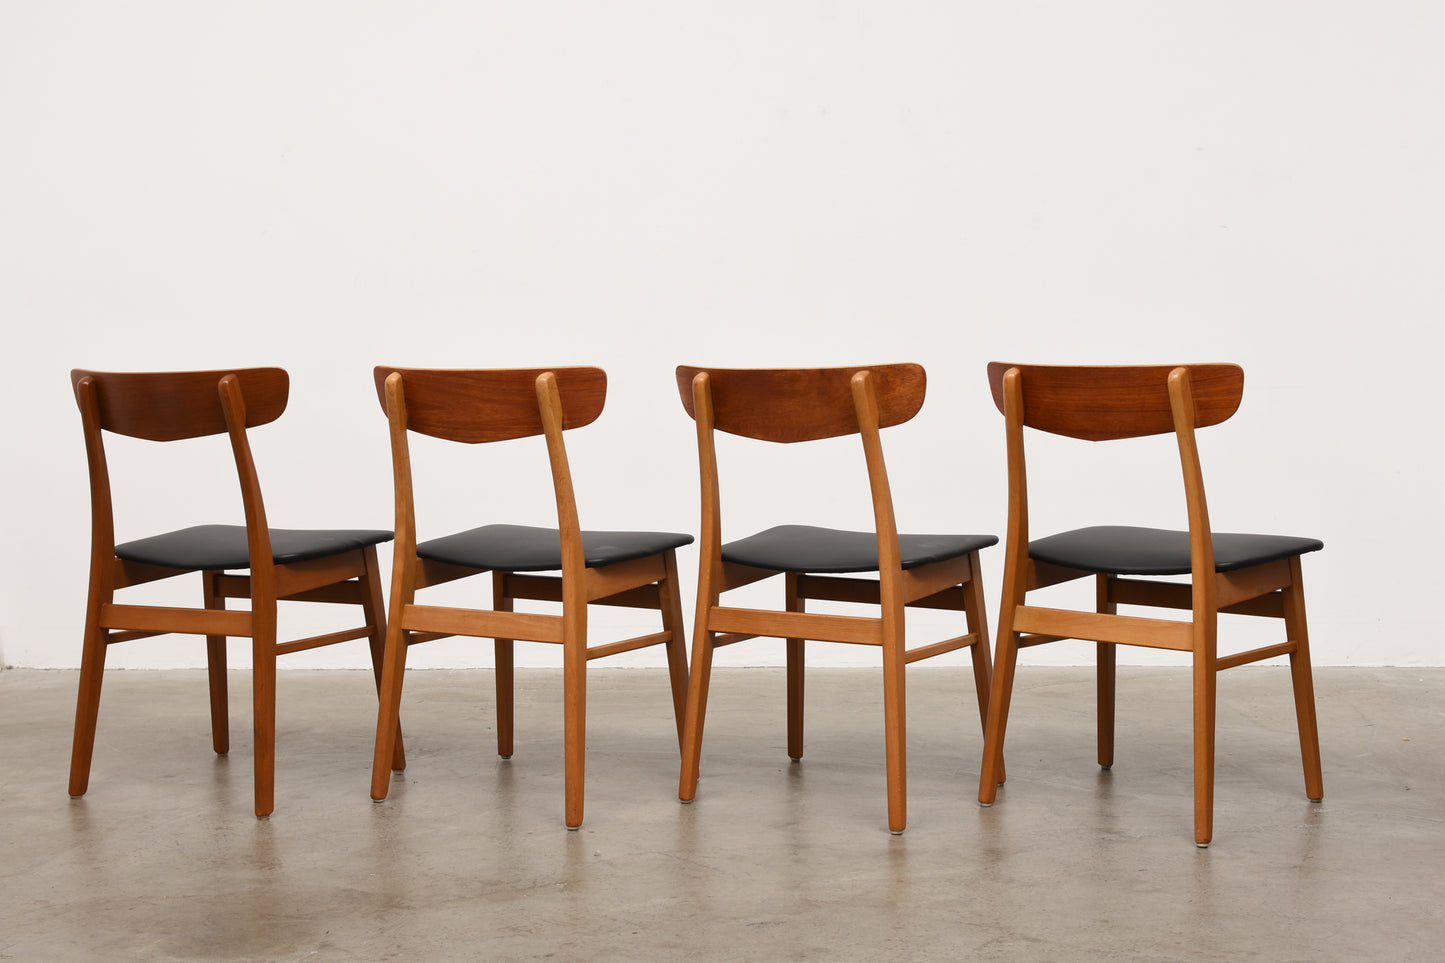 Set of four teak + beech dining chairs by Farstrup